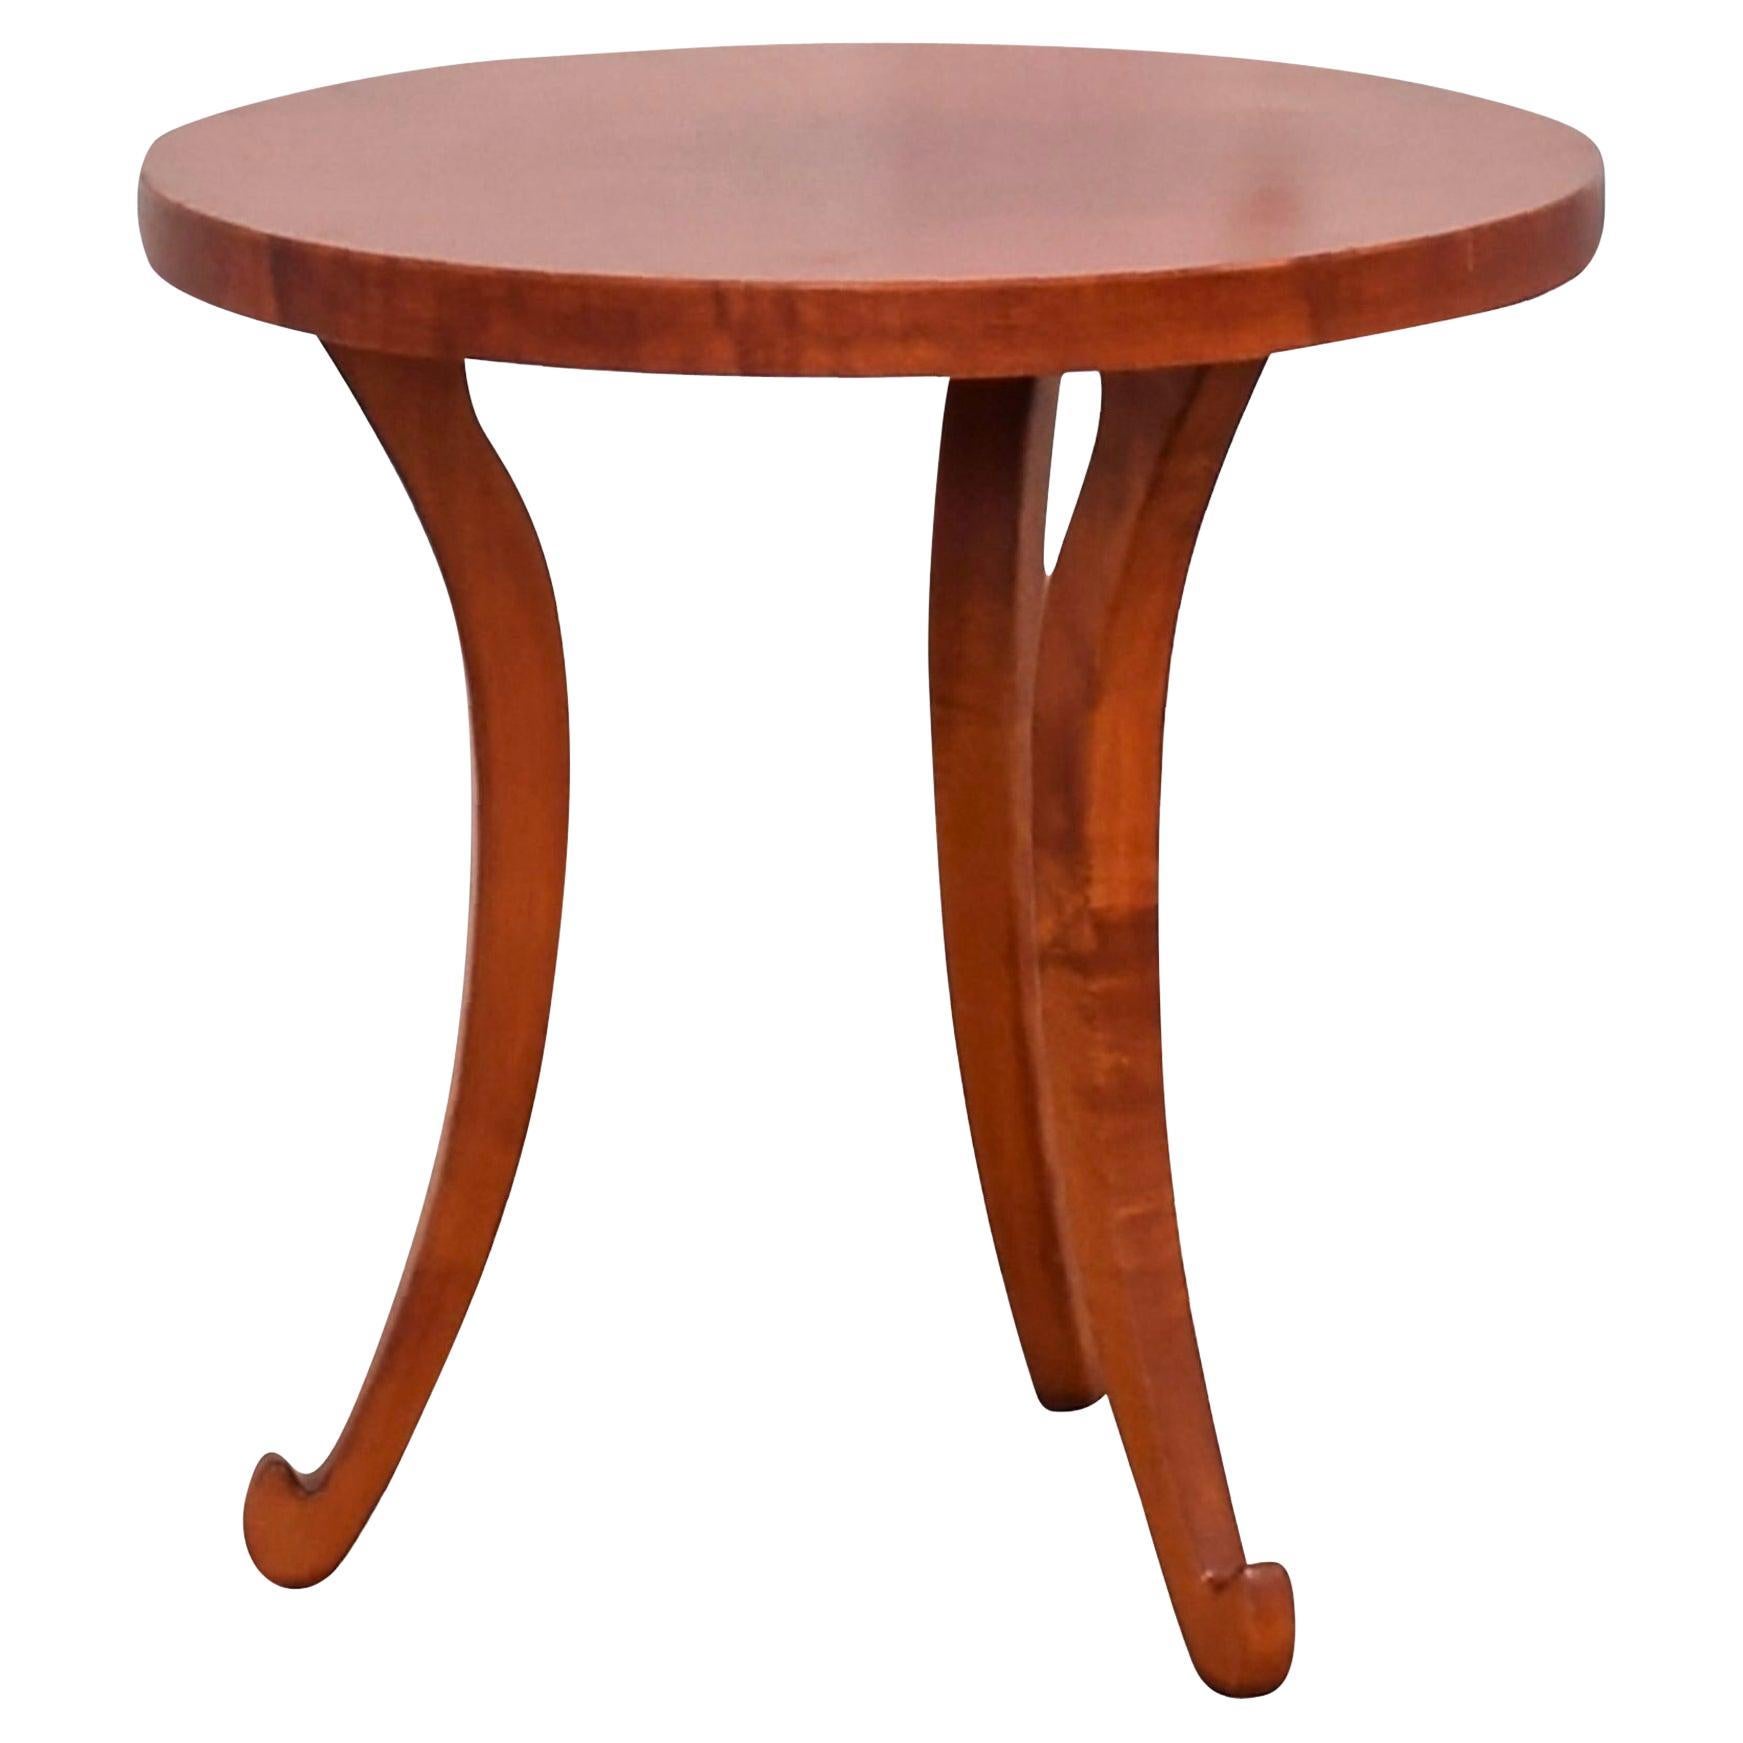 Postmodern Curly Maple Round Side Table by Dialogica, New York, 1990s For Sale